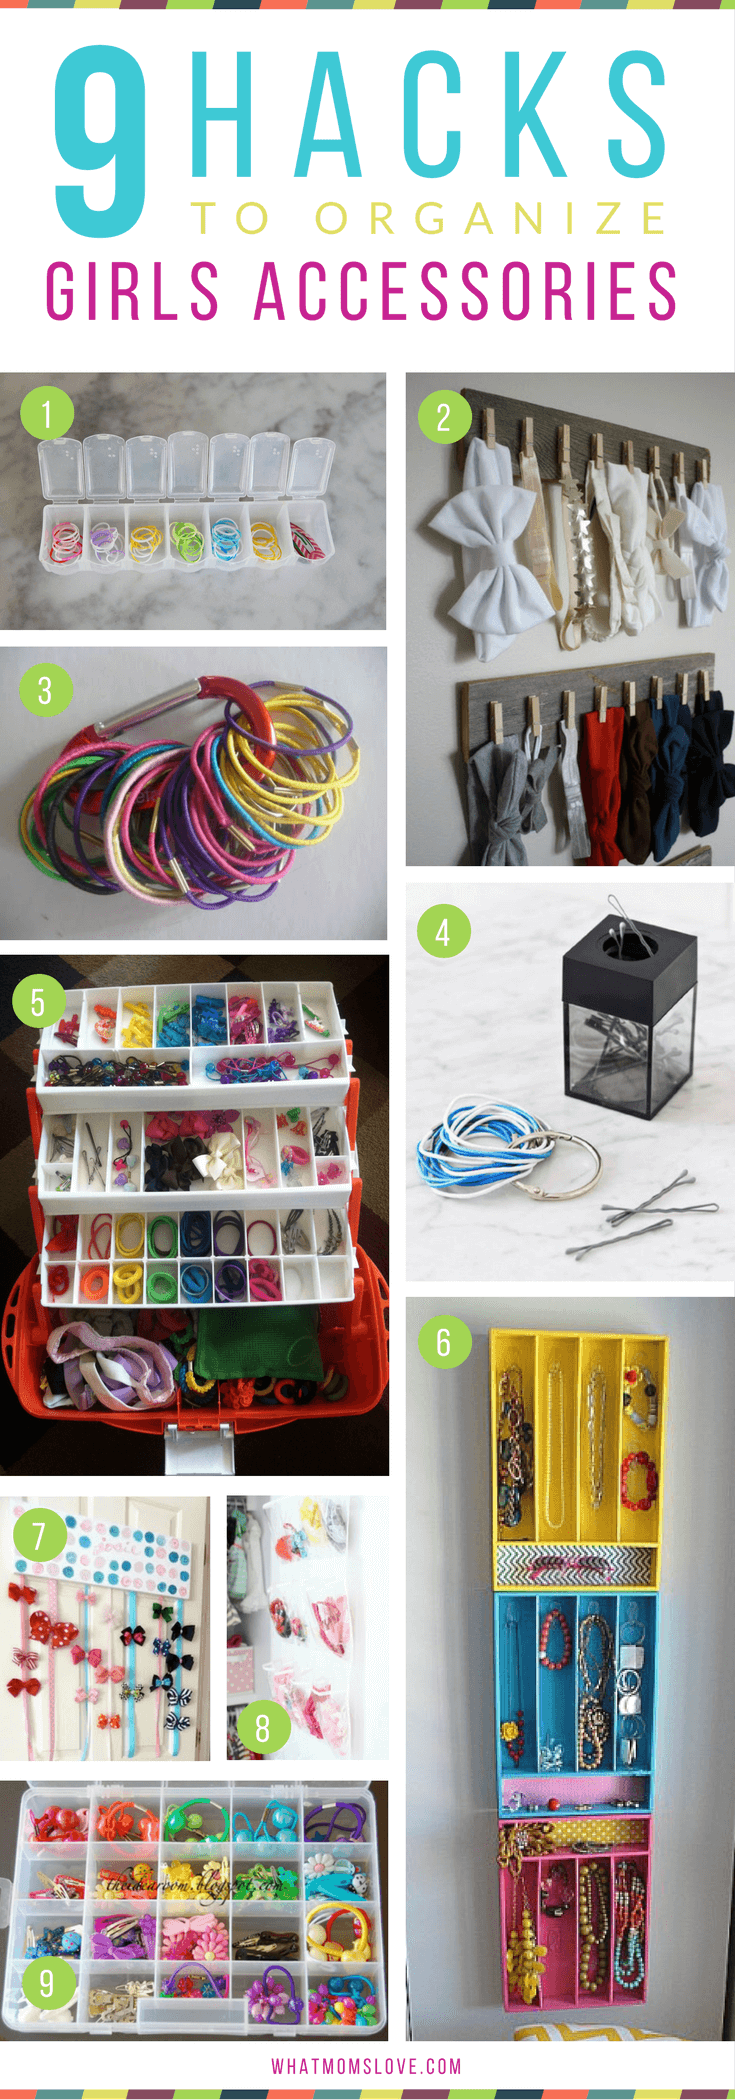 How to organize girls hair accessories, bows, elastics | Hacks, Tips and Tricks for Organized, Stress-Free Mornings with kids